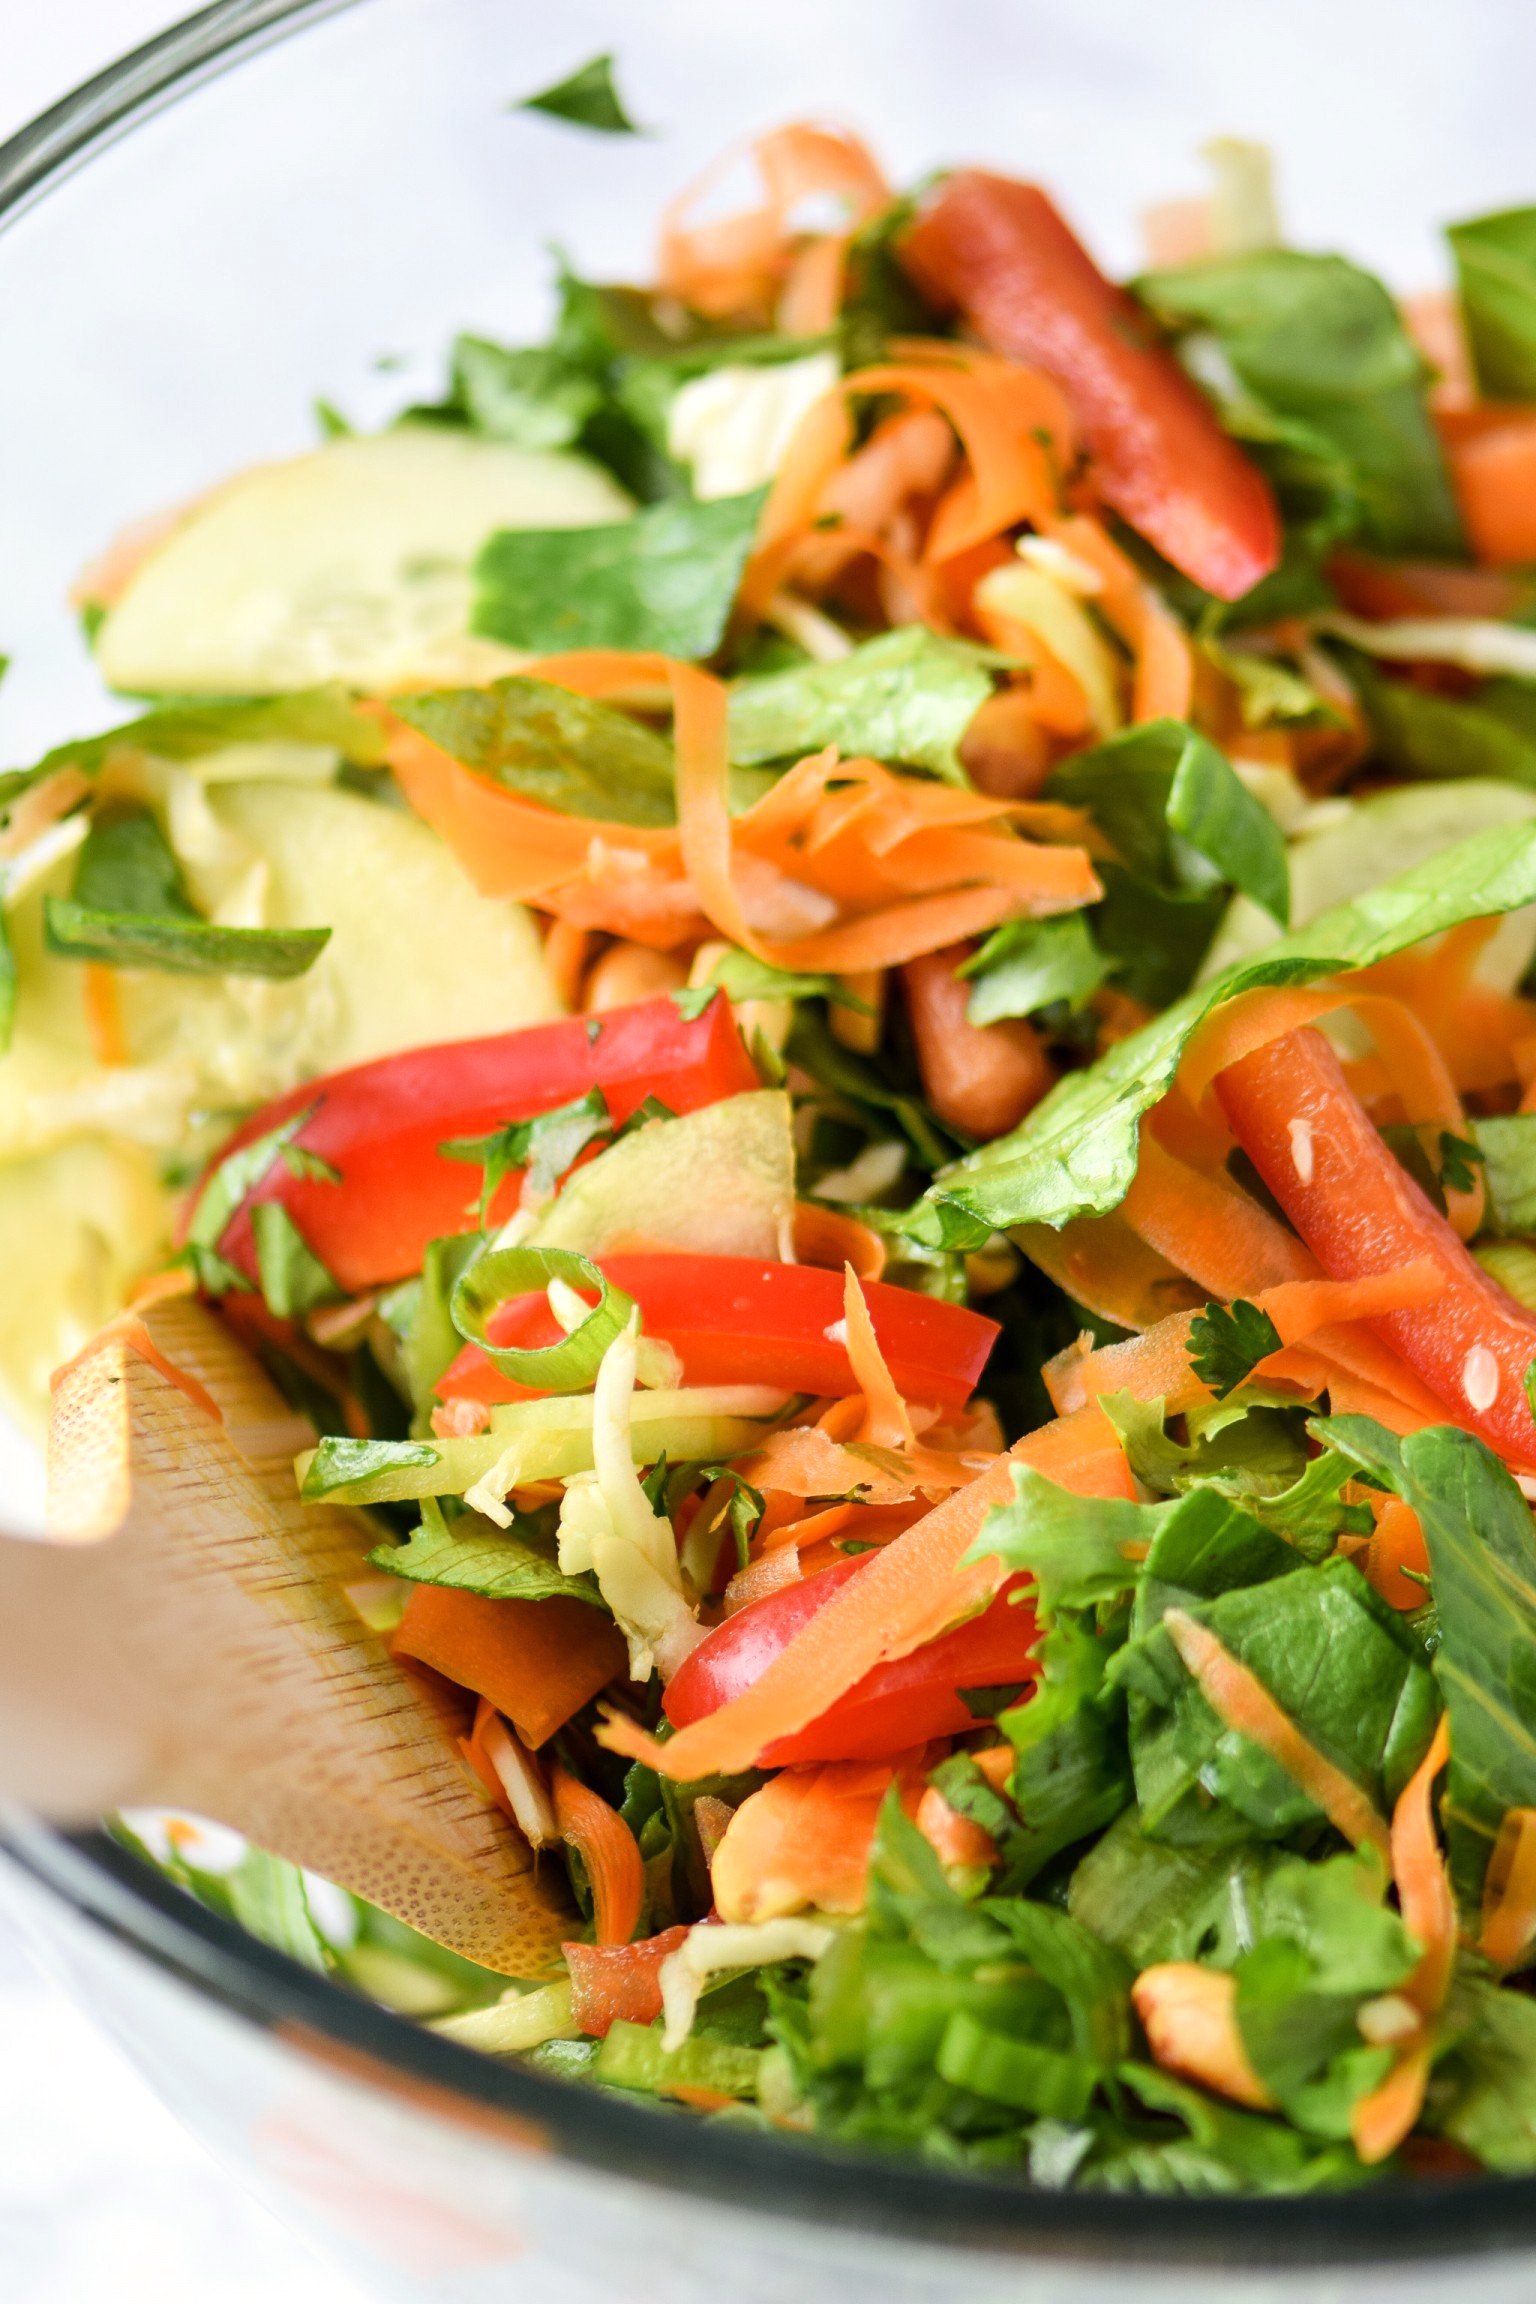 Colorful thai inspired salad with romaine, cilantro, bell peppers, carrots and cucumber.